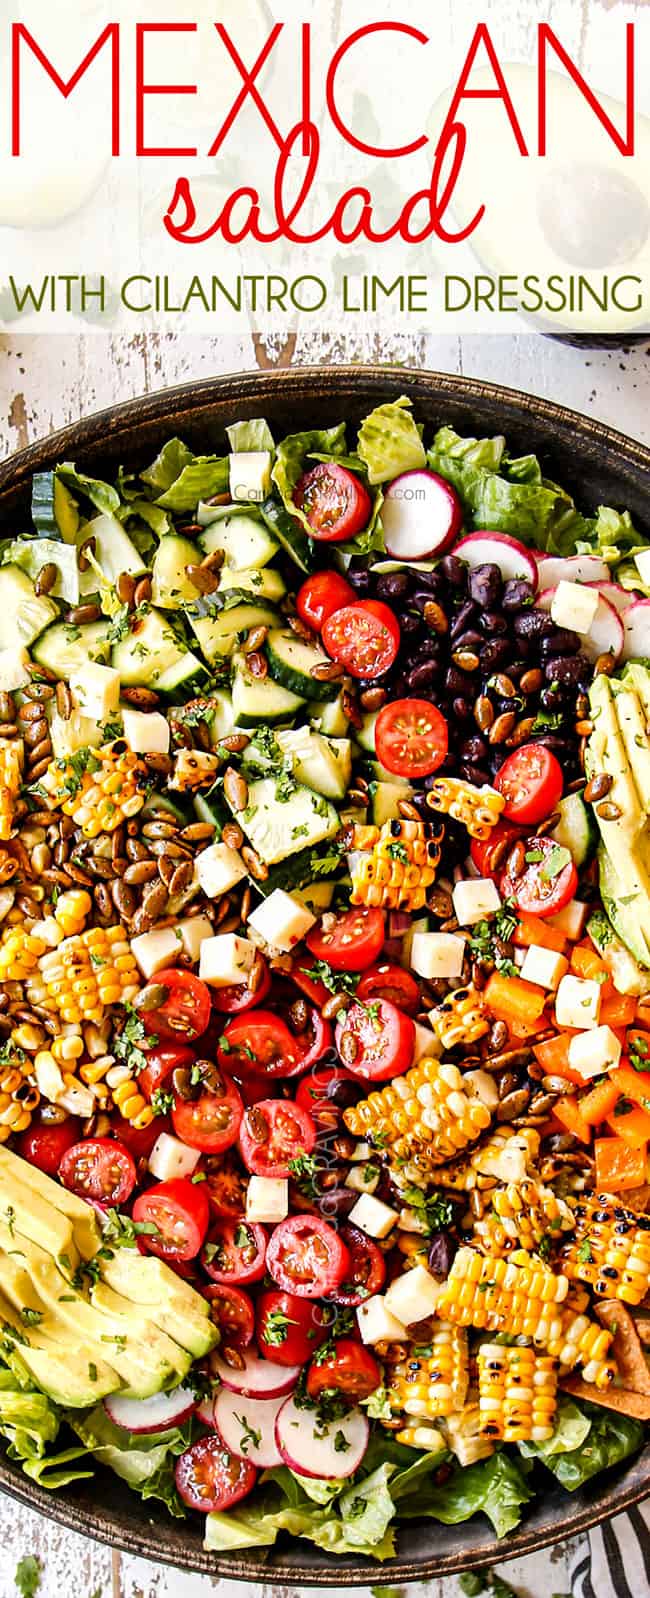 top view showing how to make Mexican Salad by adding tomatoes, corn, black beans, cucumbers and avocados to a wooden bowl